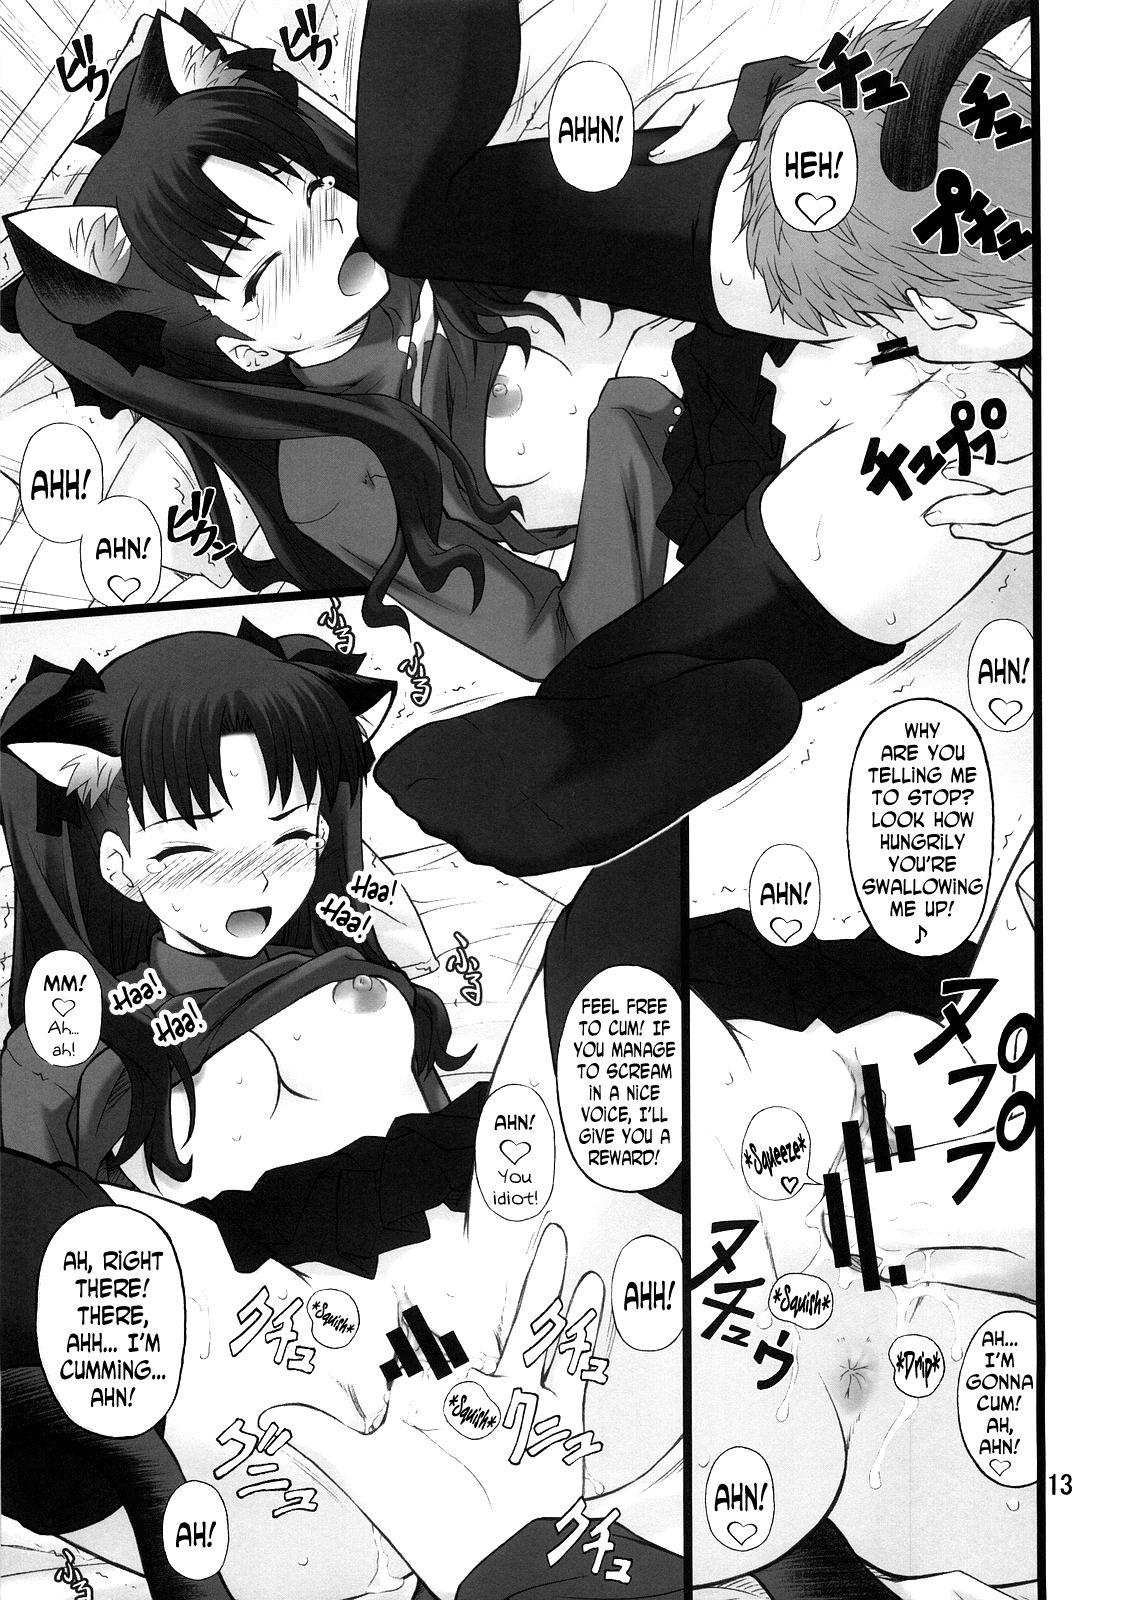 Sucking Grem-Rin 1 - Fate stay night Virgin - Page 12